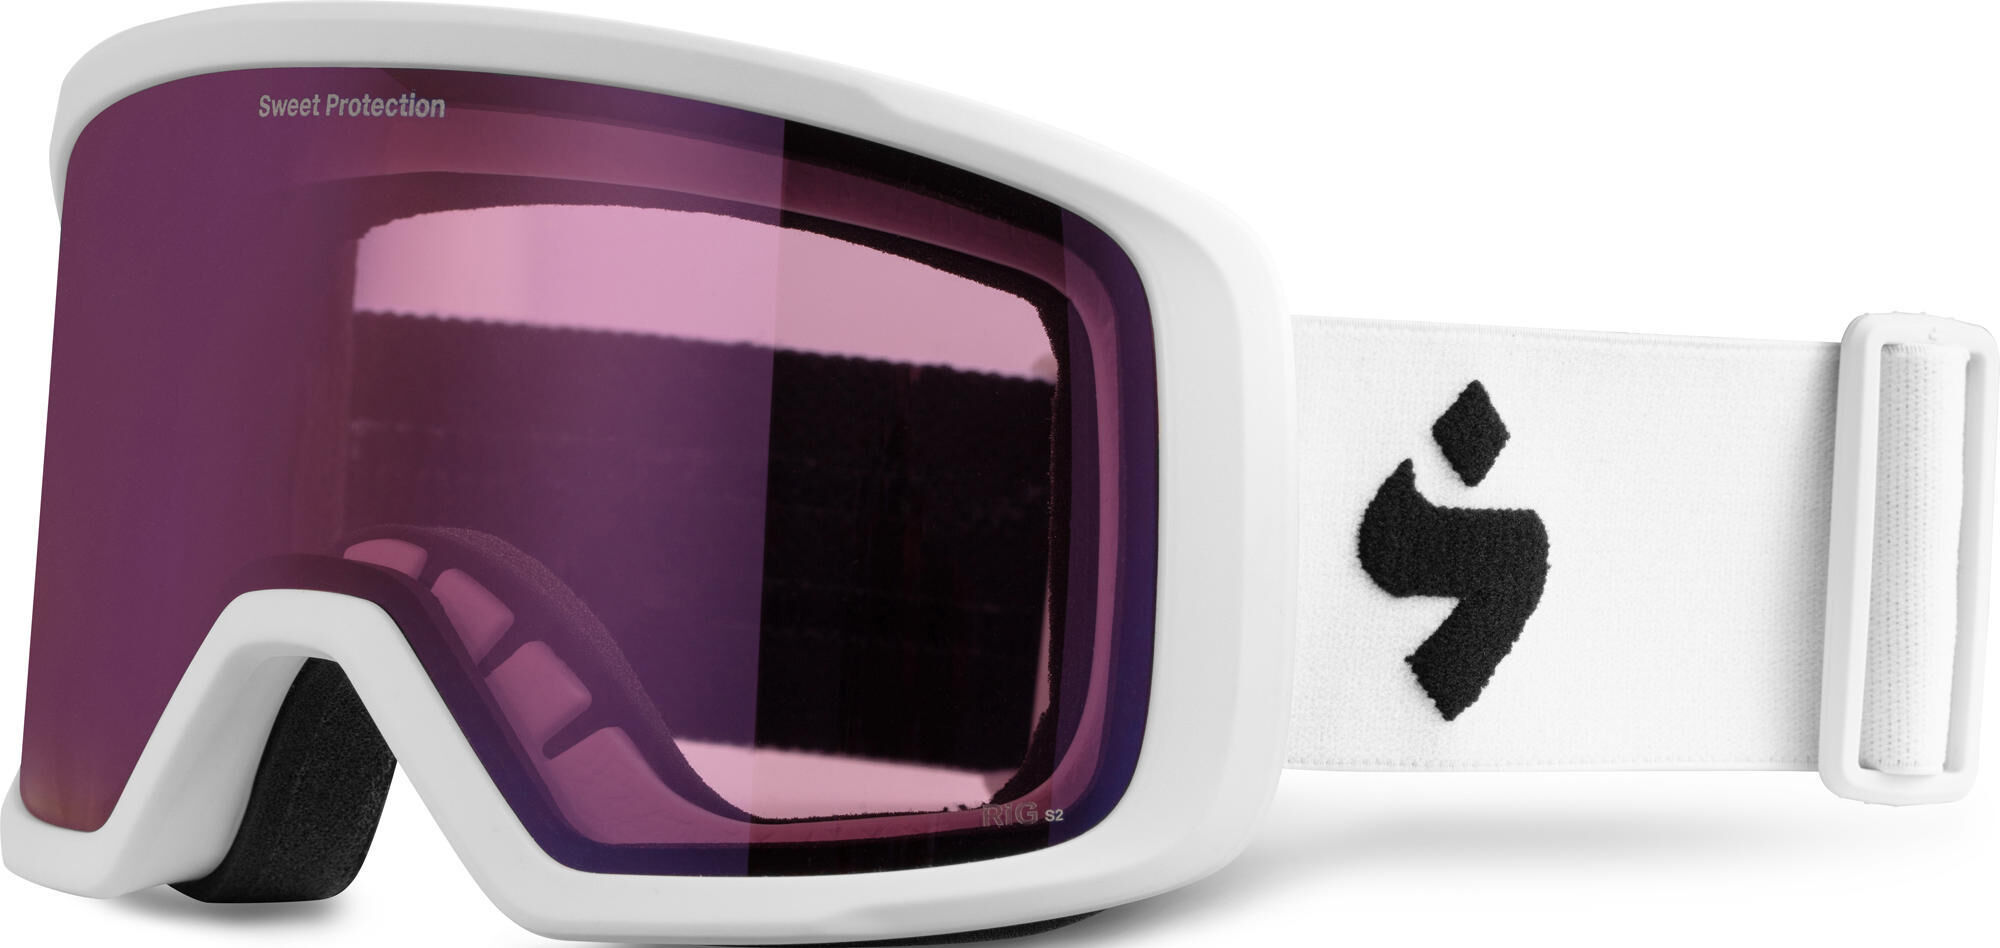 Sweet Protection Firewall RIG rig amethyst - satin white (RAMET-SWHT)